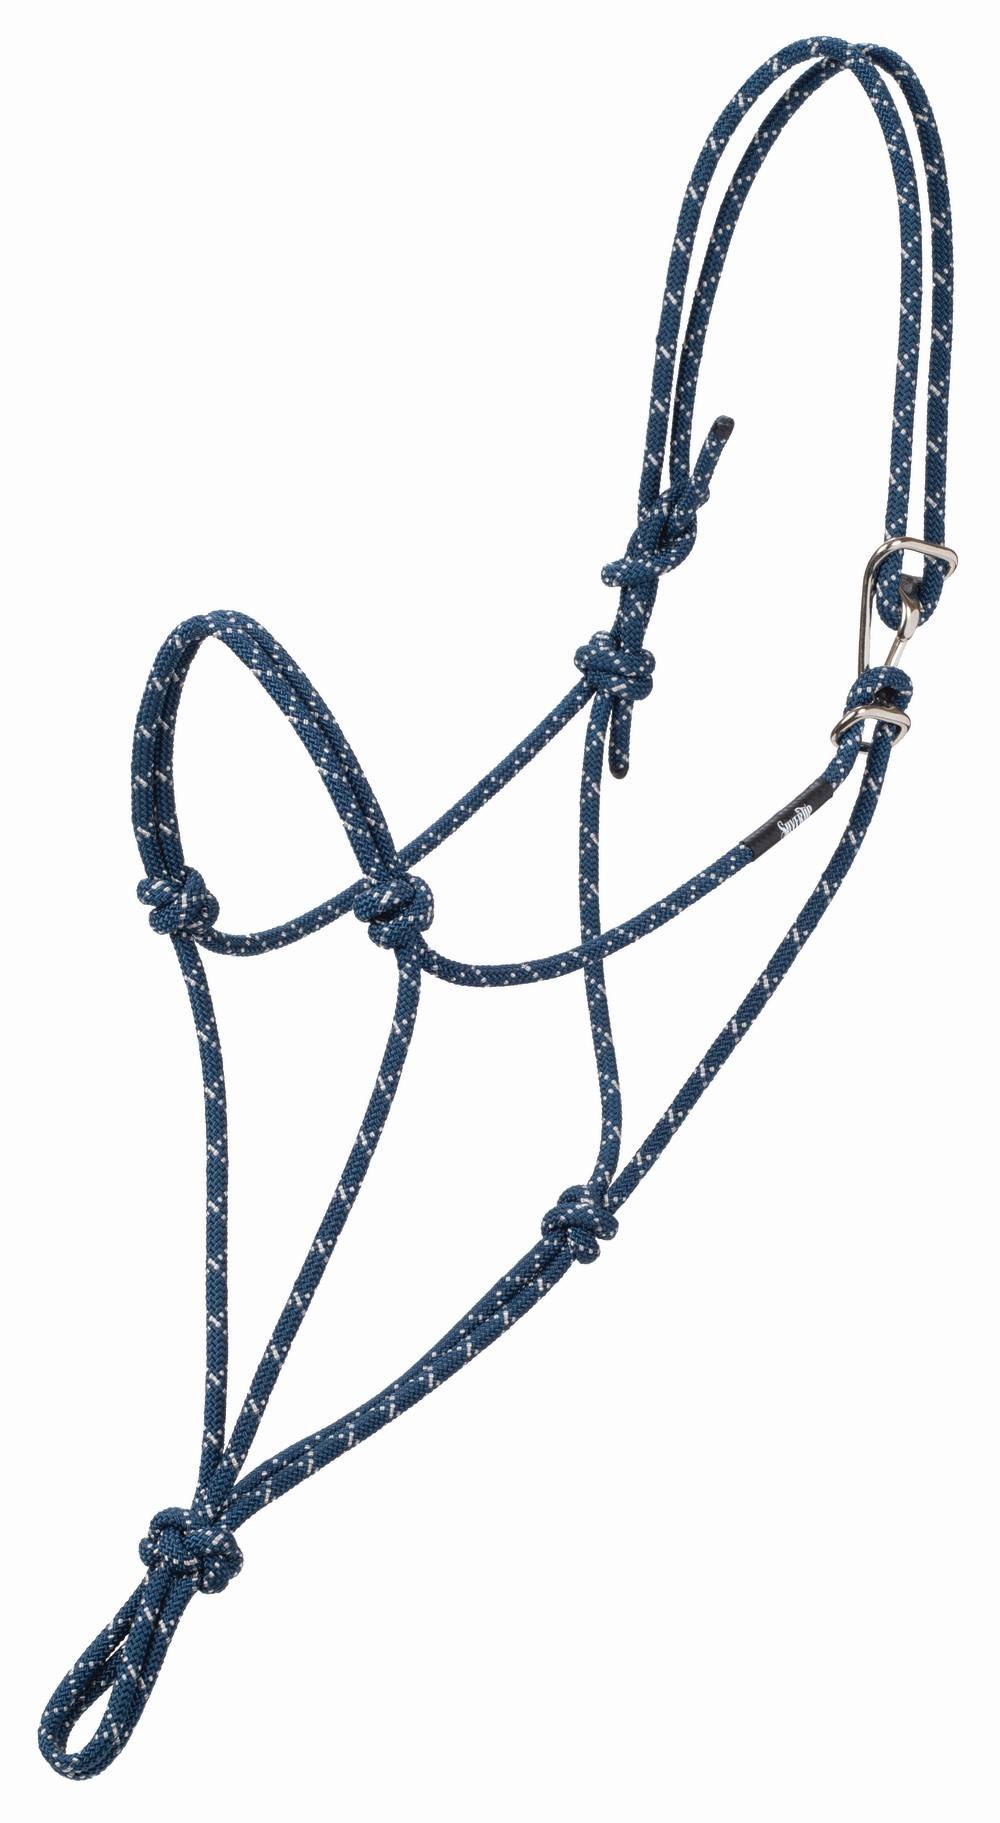 Details about   Weaver Leather Silvertip #95 Clip on Rope Halter 